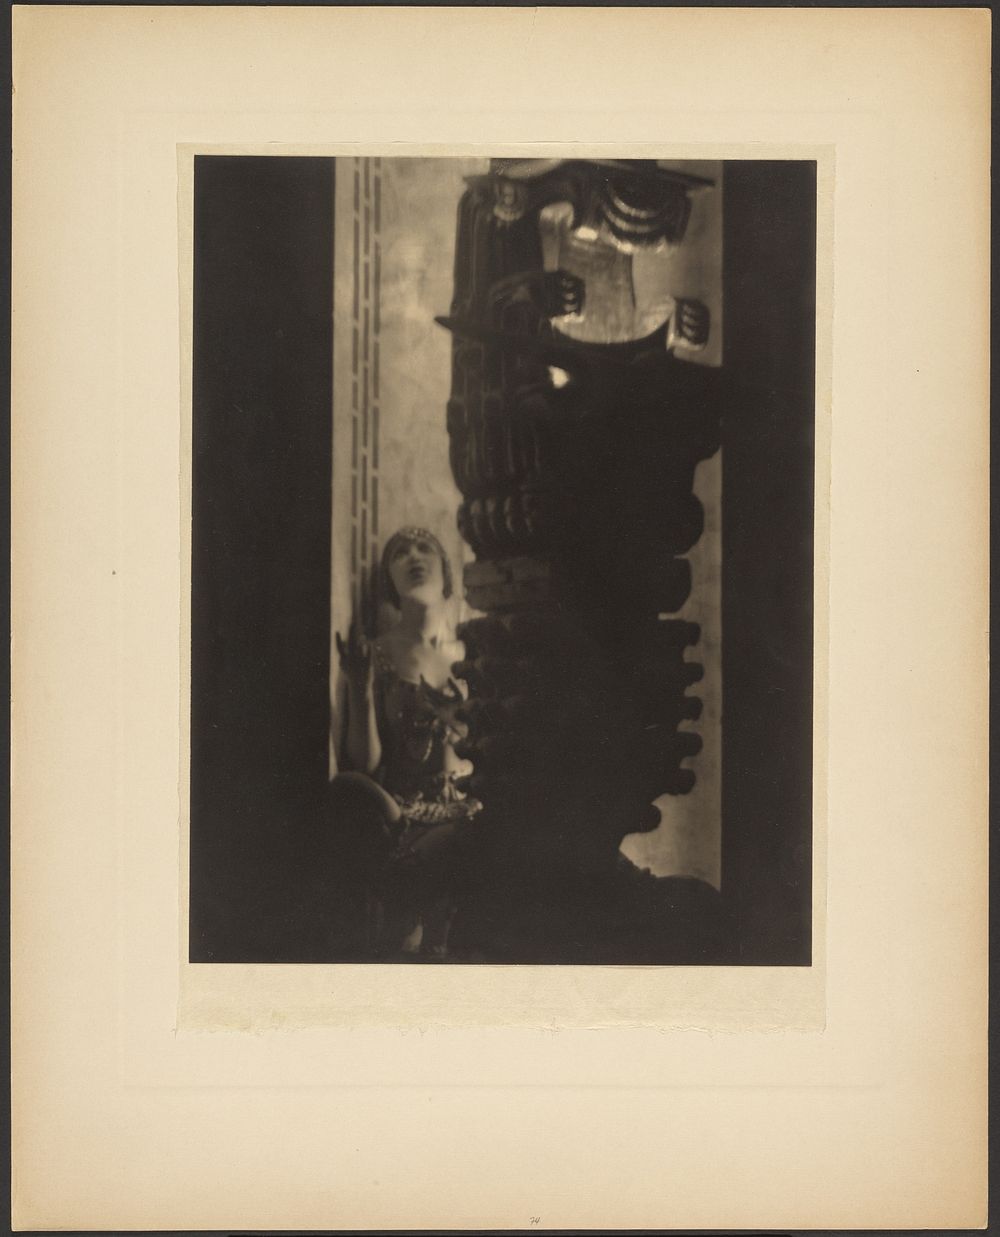 Female Dancer Reacting to Large Object on Stage by Arthur F Kales